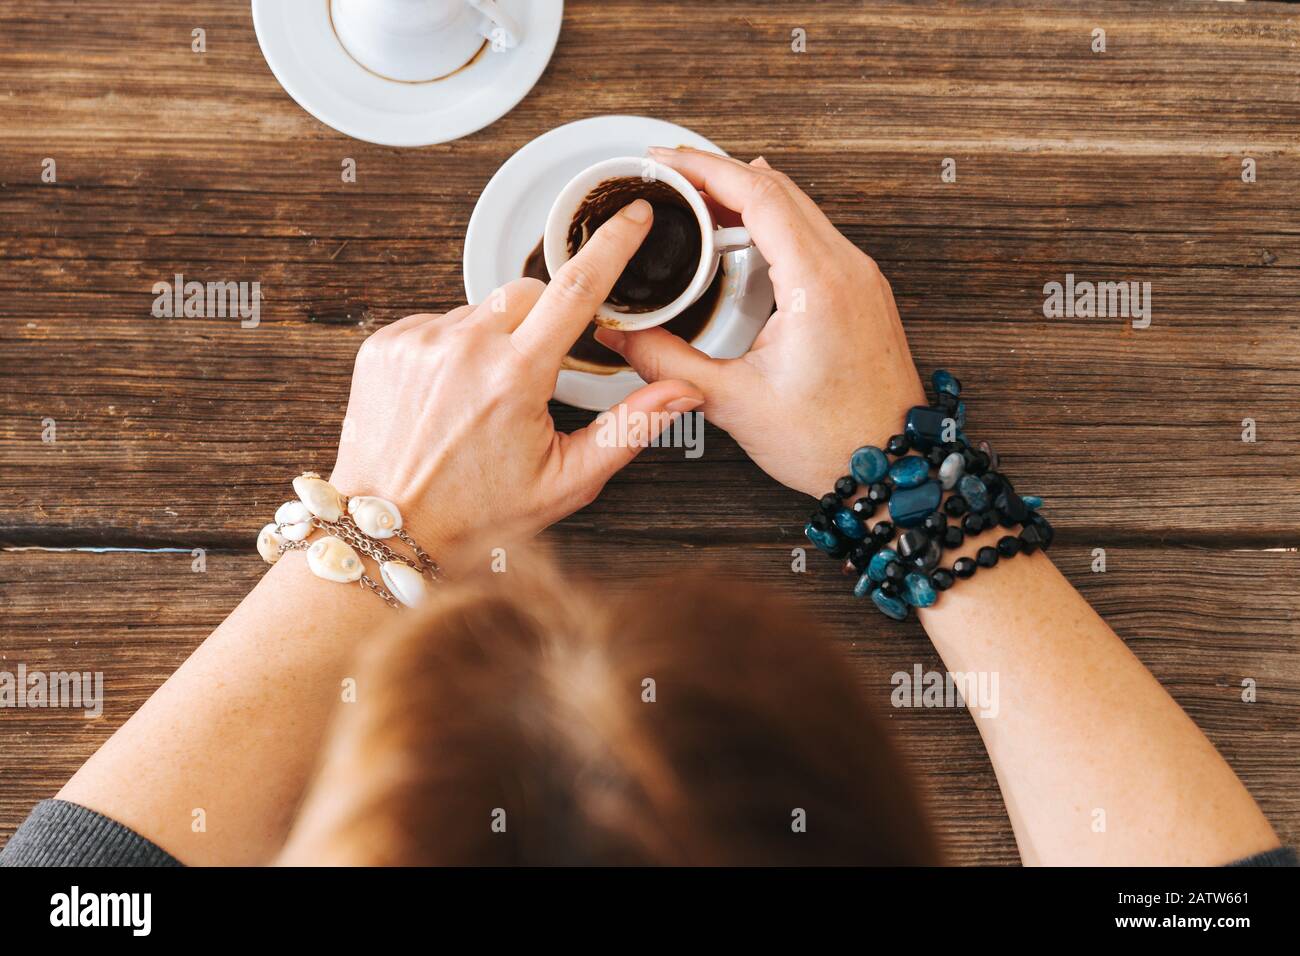 woman hold the mug and telling fortune with traditional turkish coffee cup Stock Photo